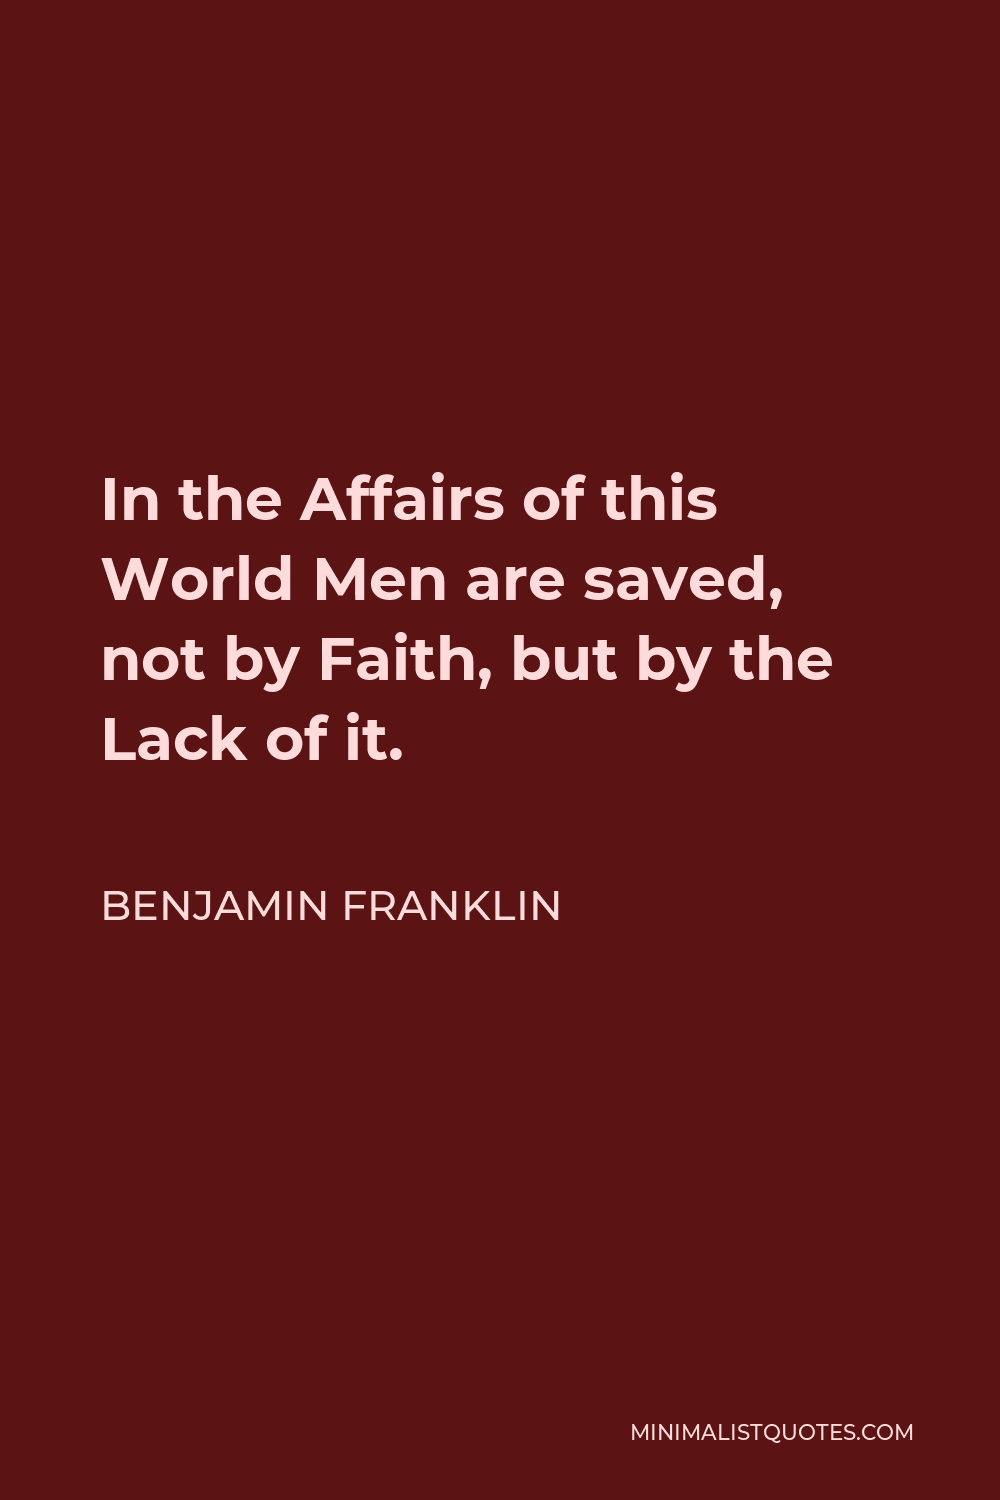 Benjamin Franklin Quote - In the Affairs of this World Men are saved, not by Faith, but by the Lack of it.